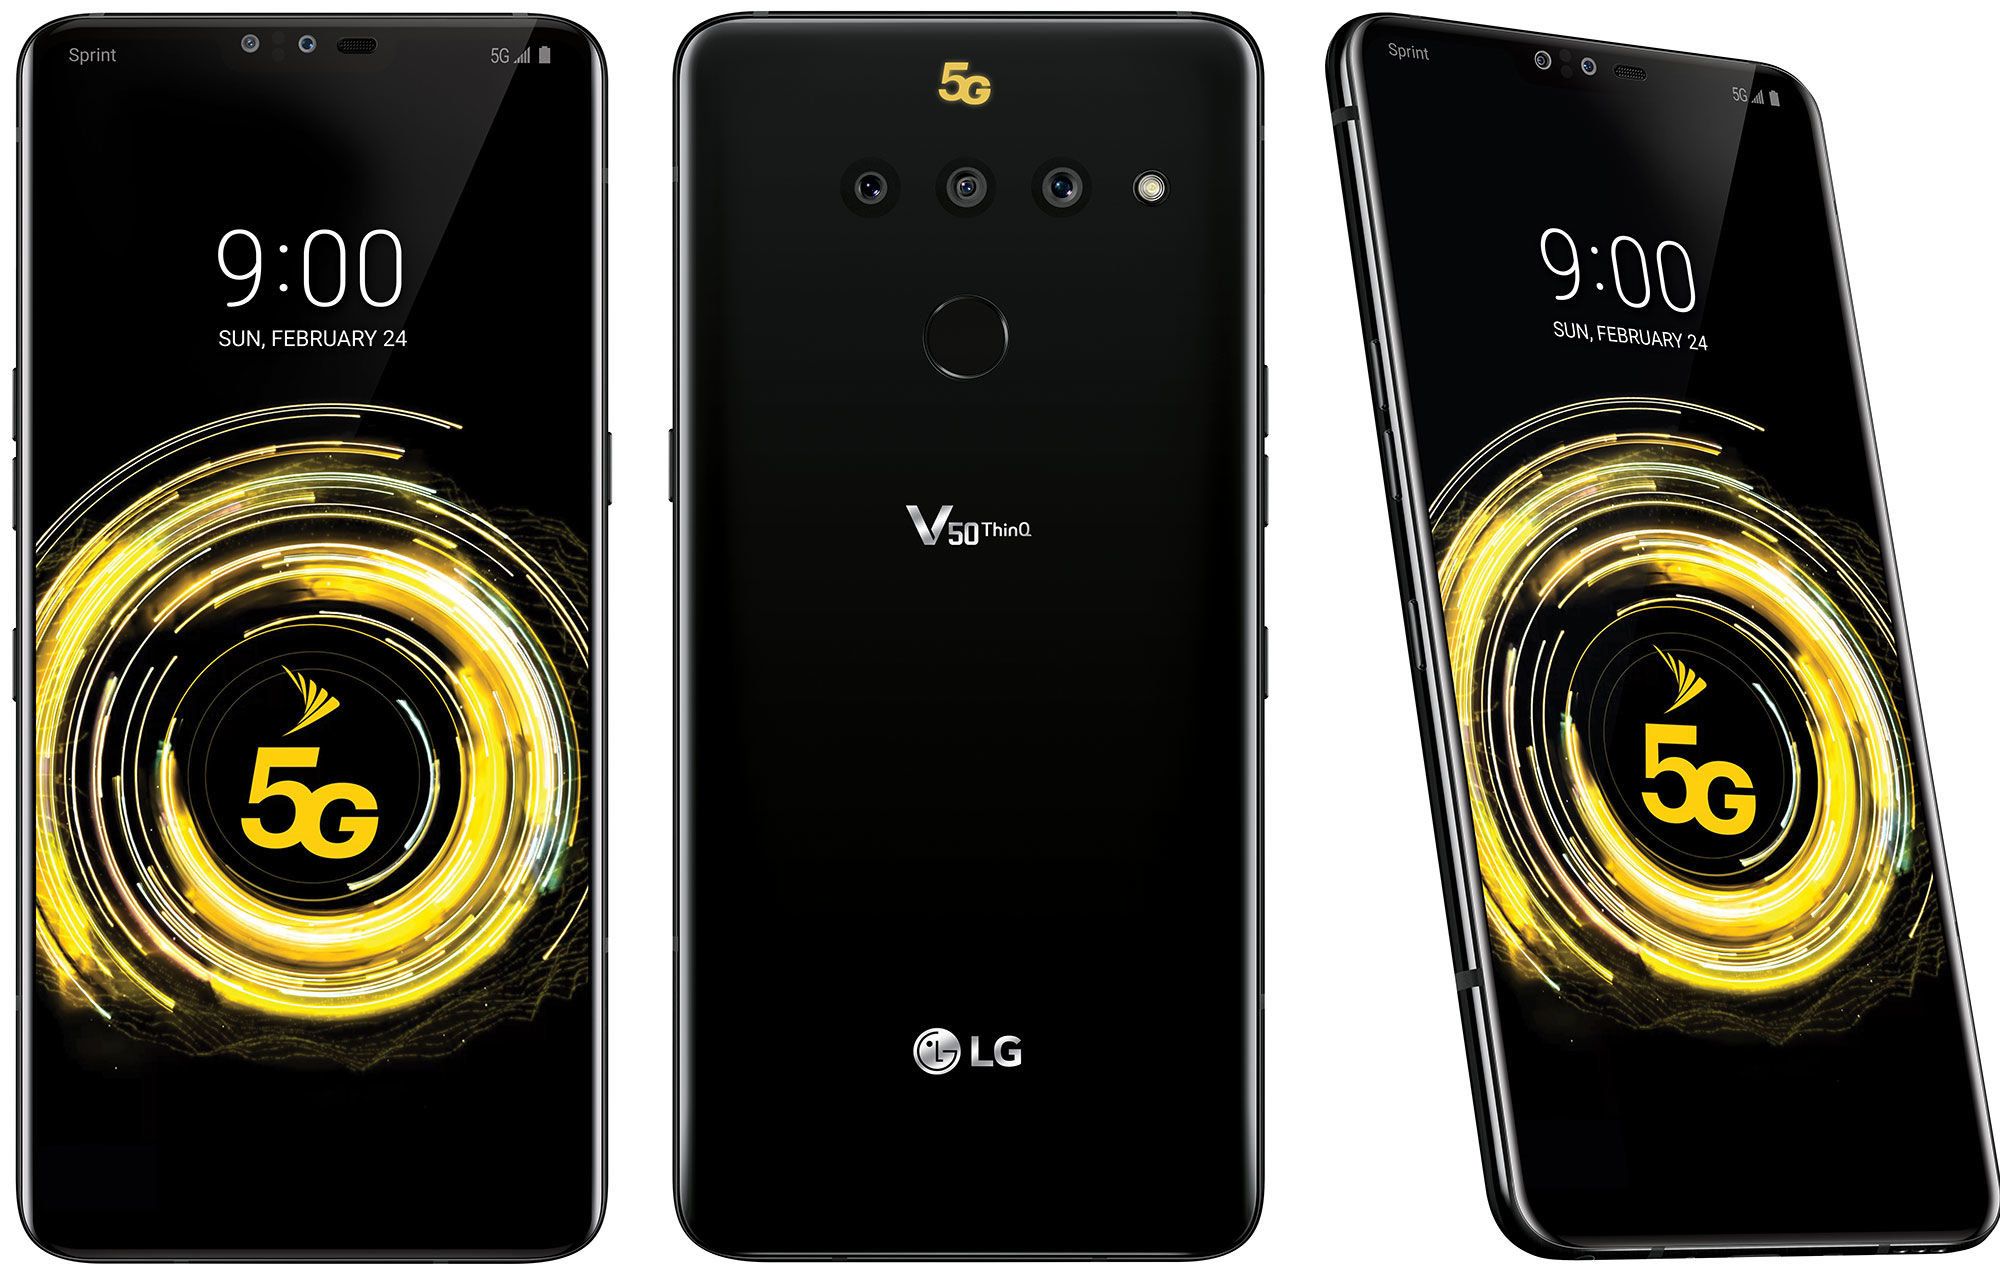 LG V50 ThinQ 5G smartphone - pros and cons